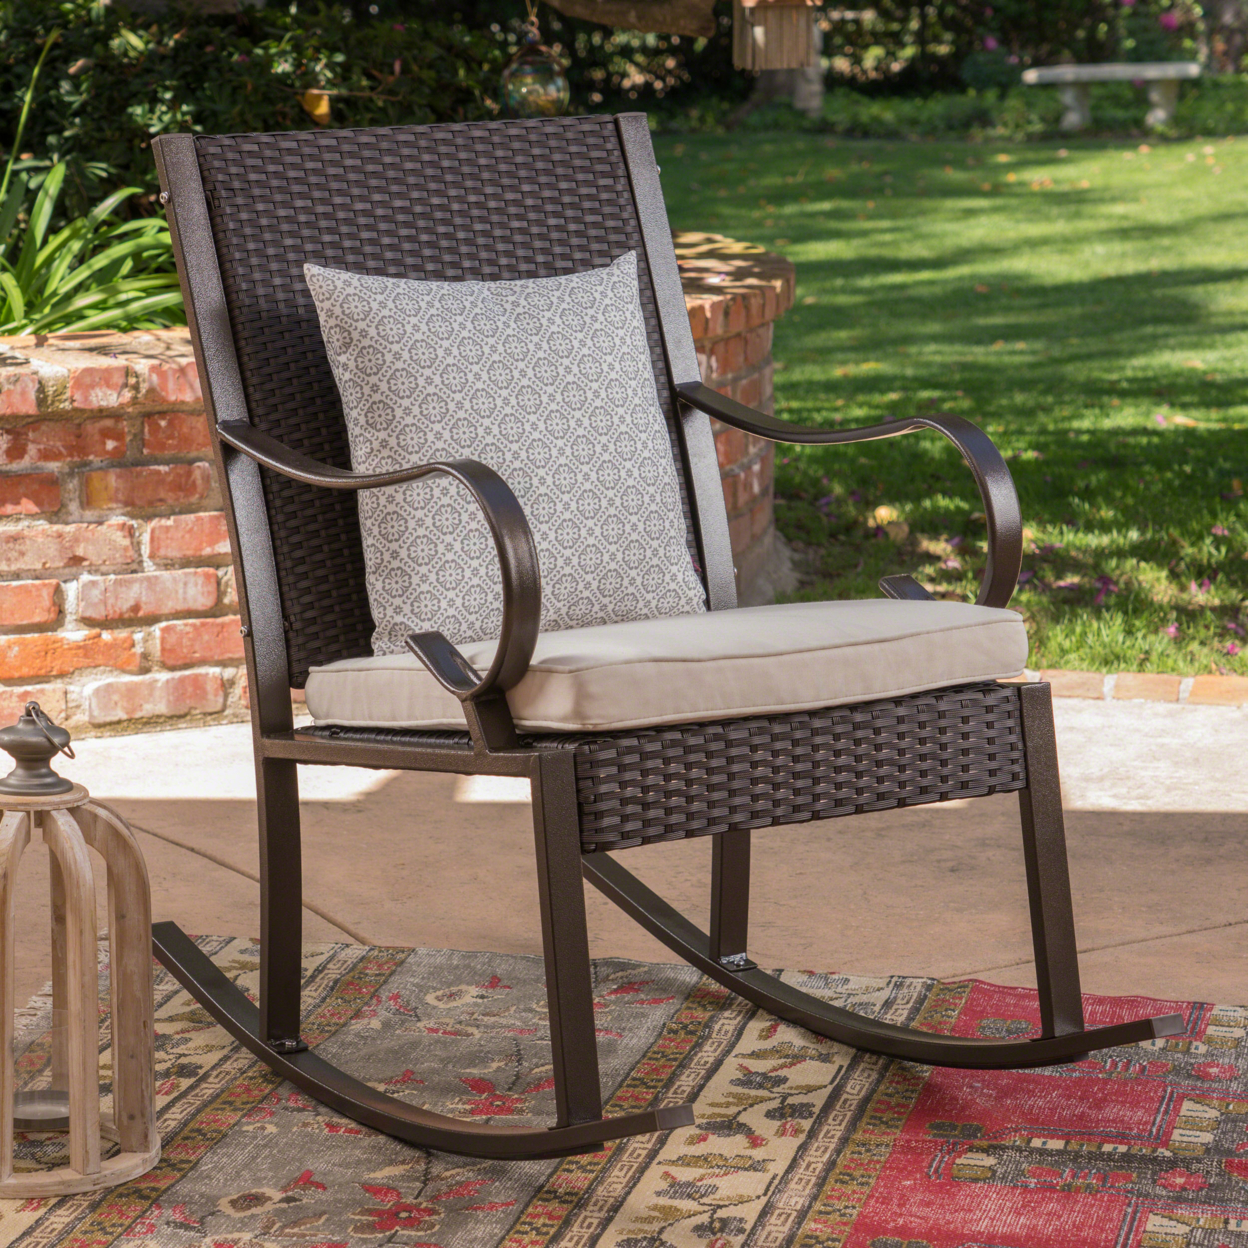 Muriel Outdoor Wicker Rocking Chair With Cushion - Black/White, Single